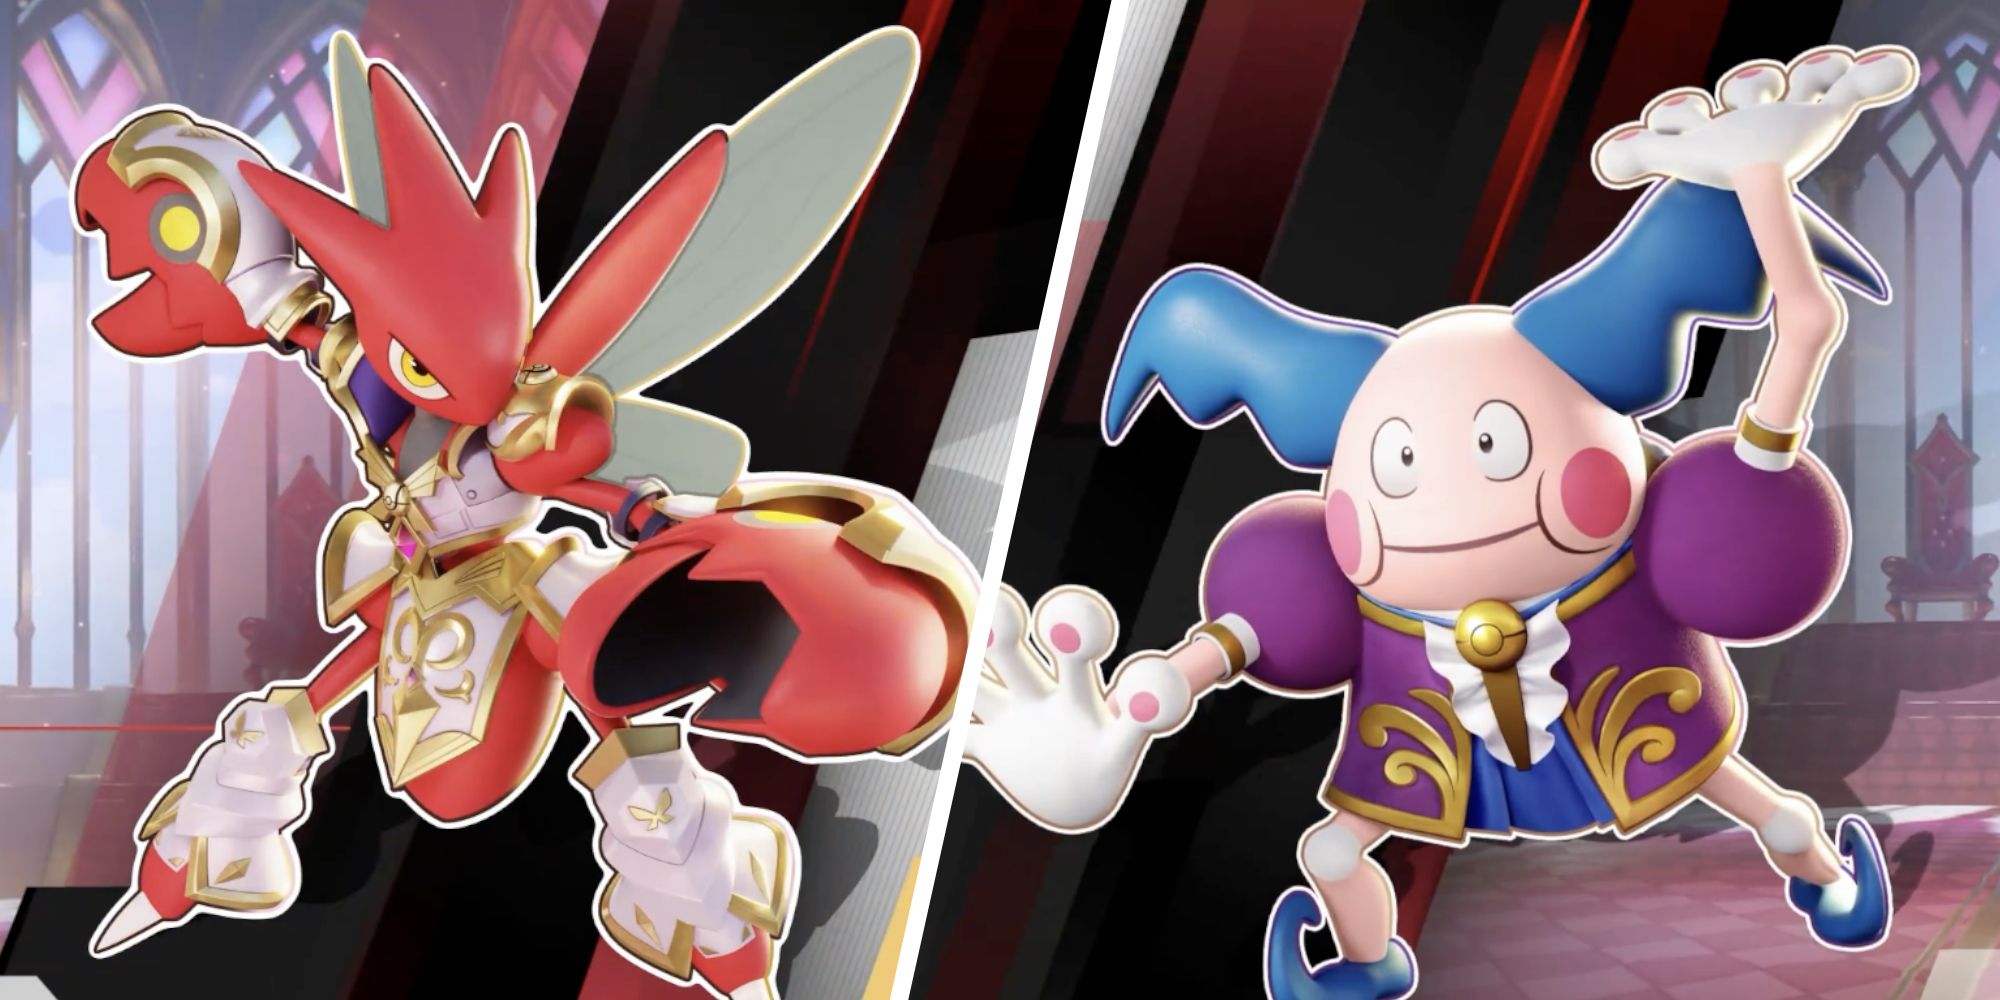 A collage showing Scizor and Mr. Mime in cool outfits.